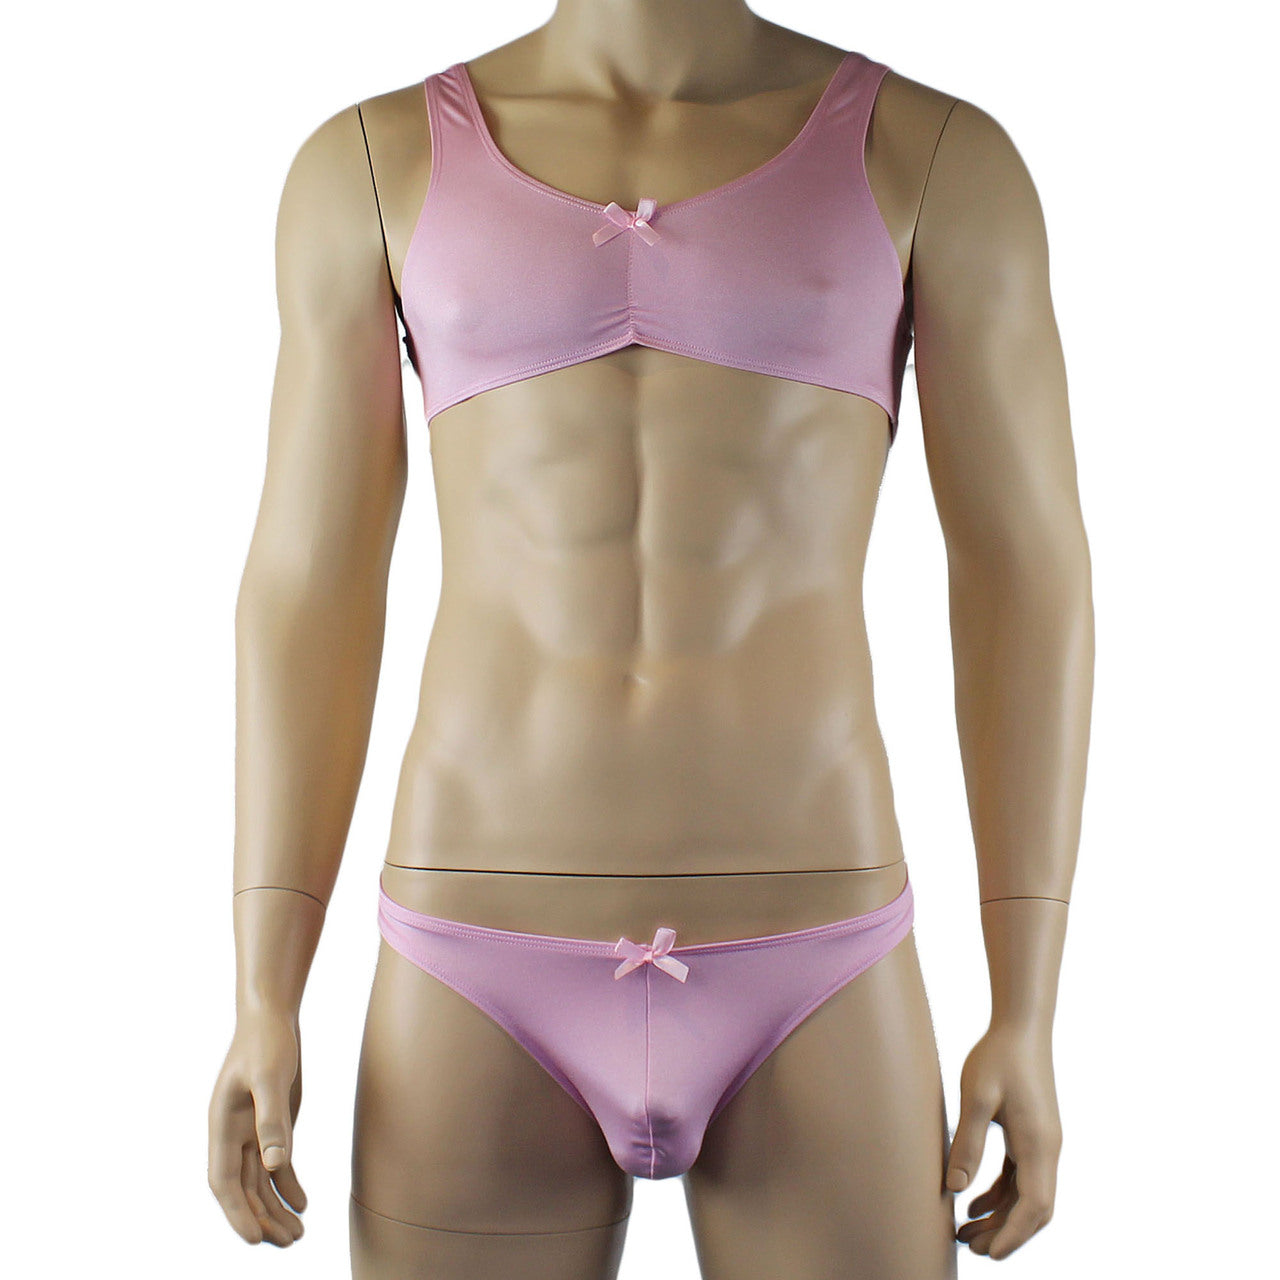 Male Stretch Lycra Bra Top & Matching Thong with Bow